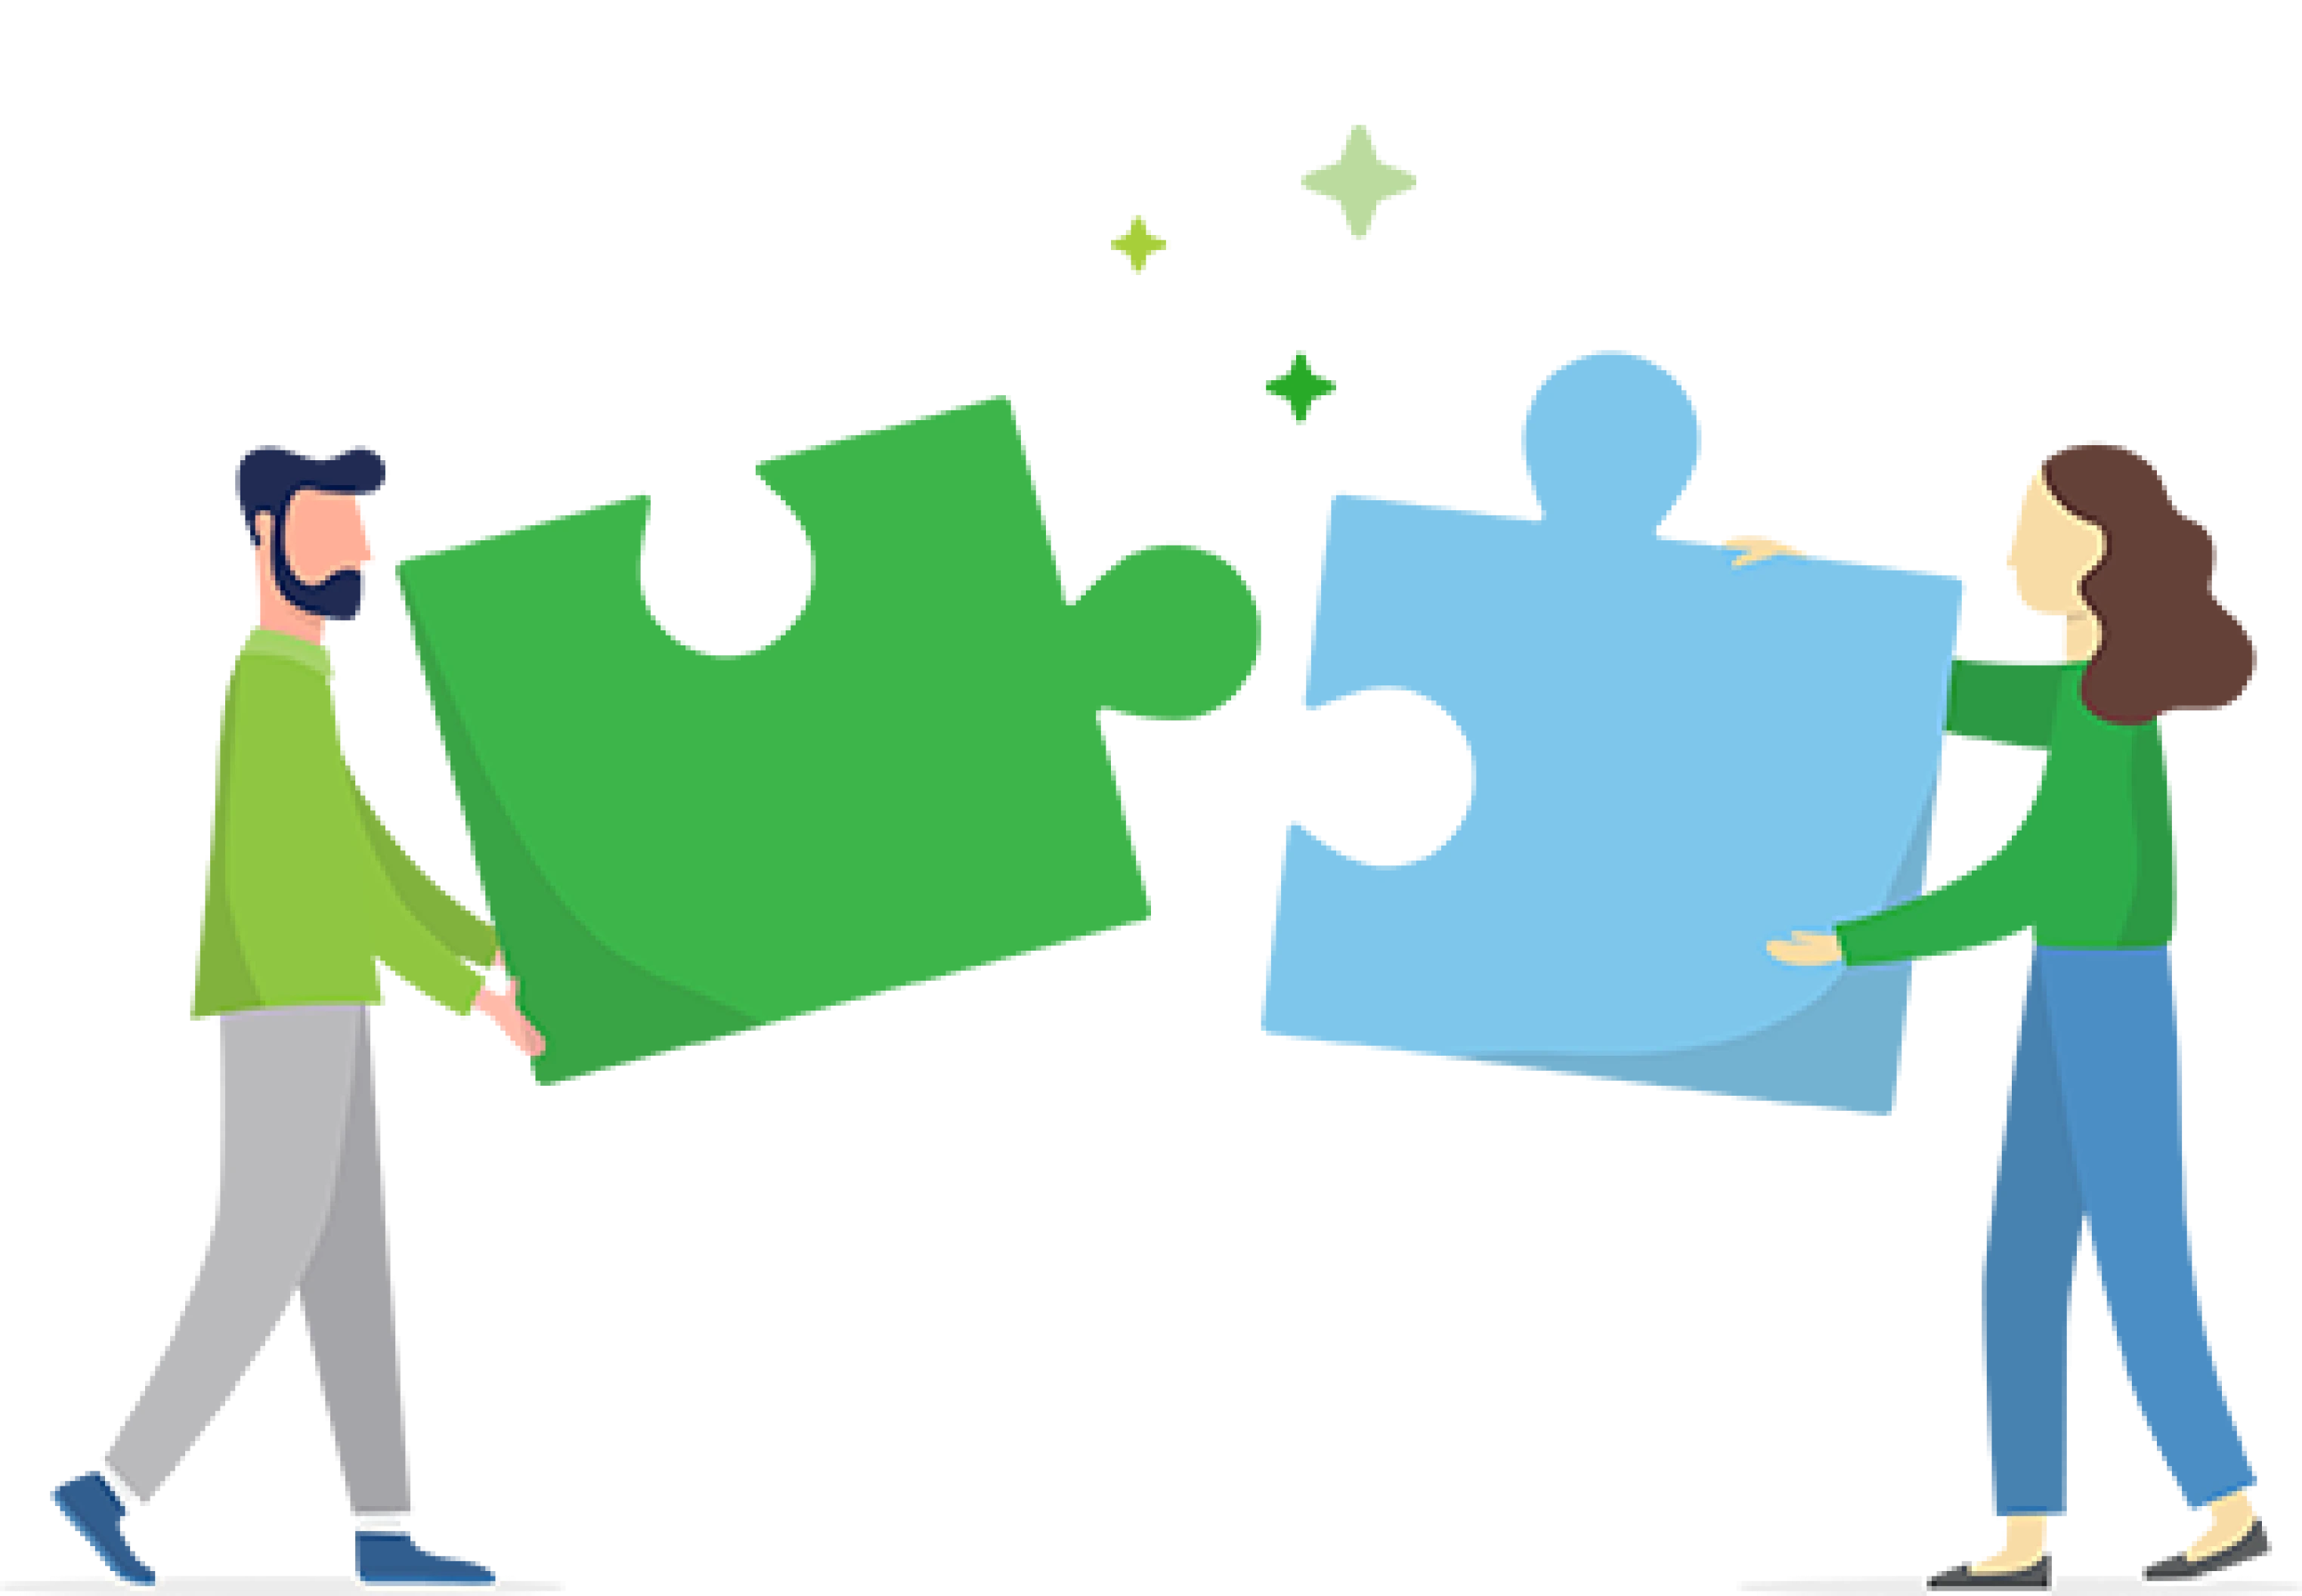 Illustration of two people holding large puzzle pieces aiming to connect